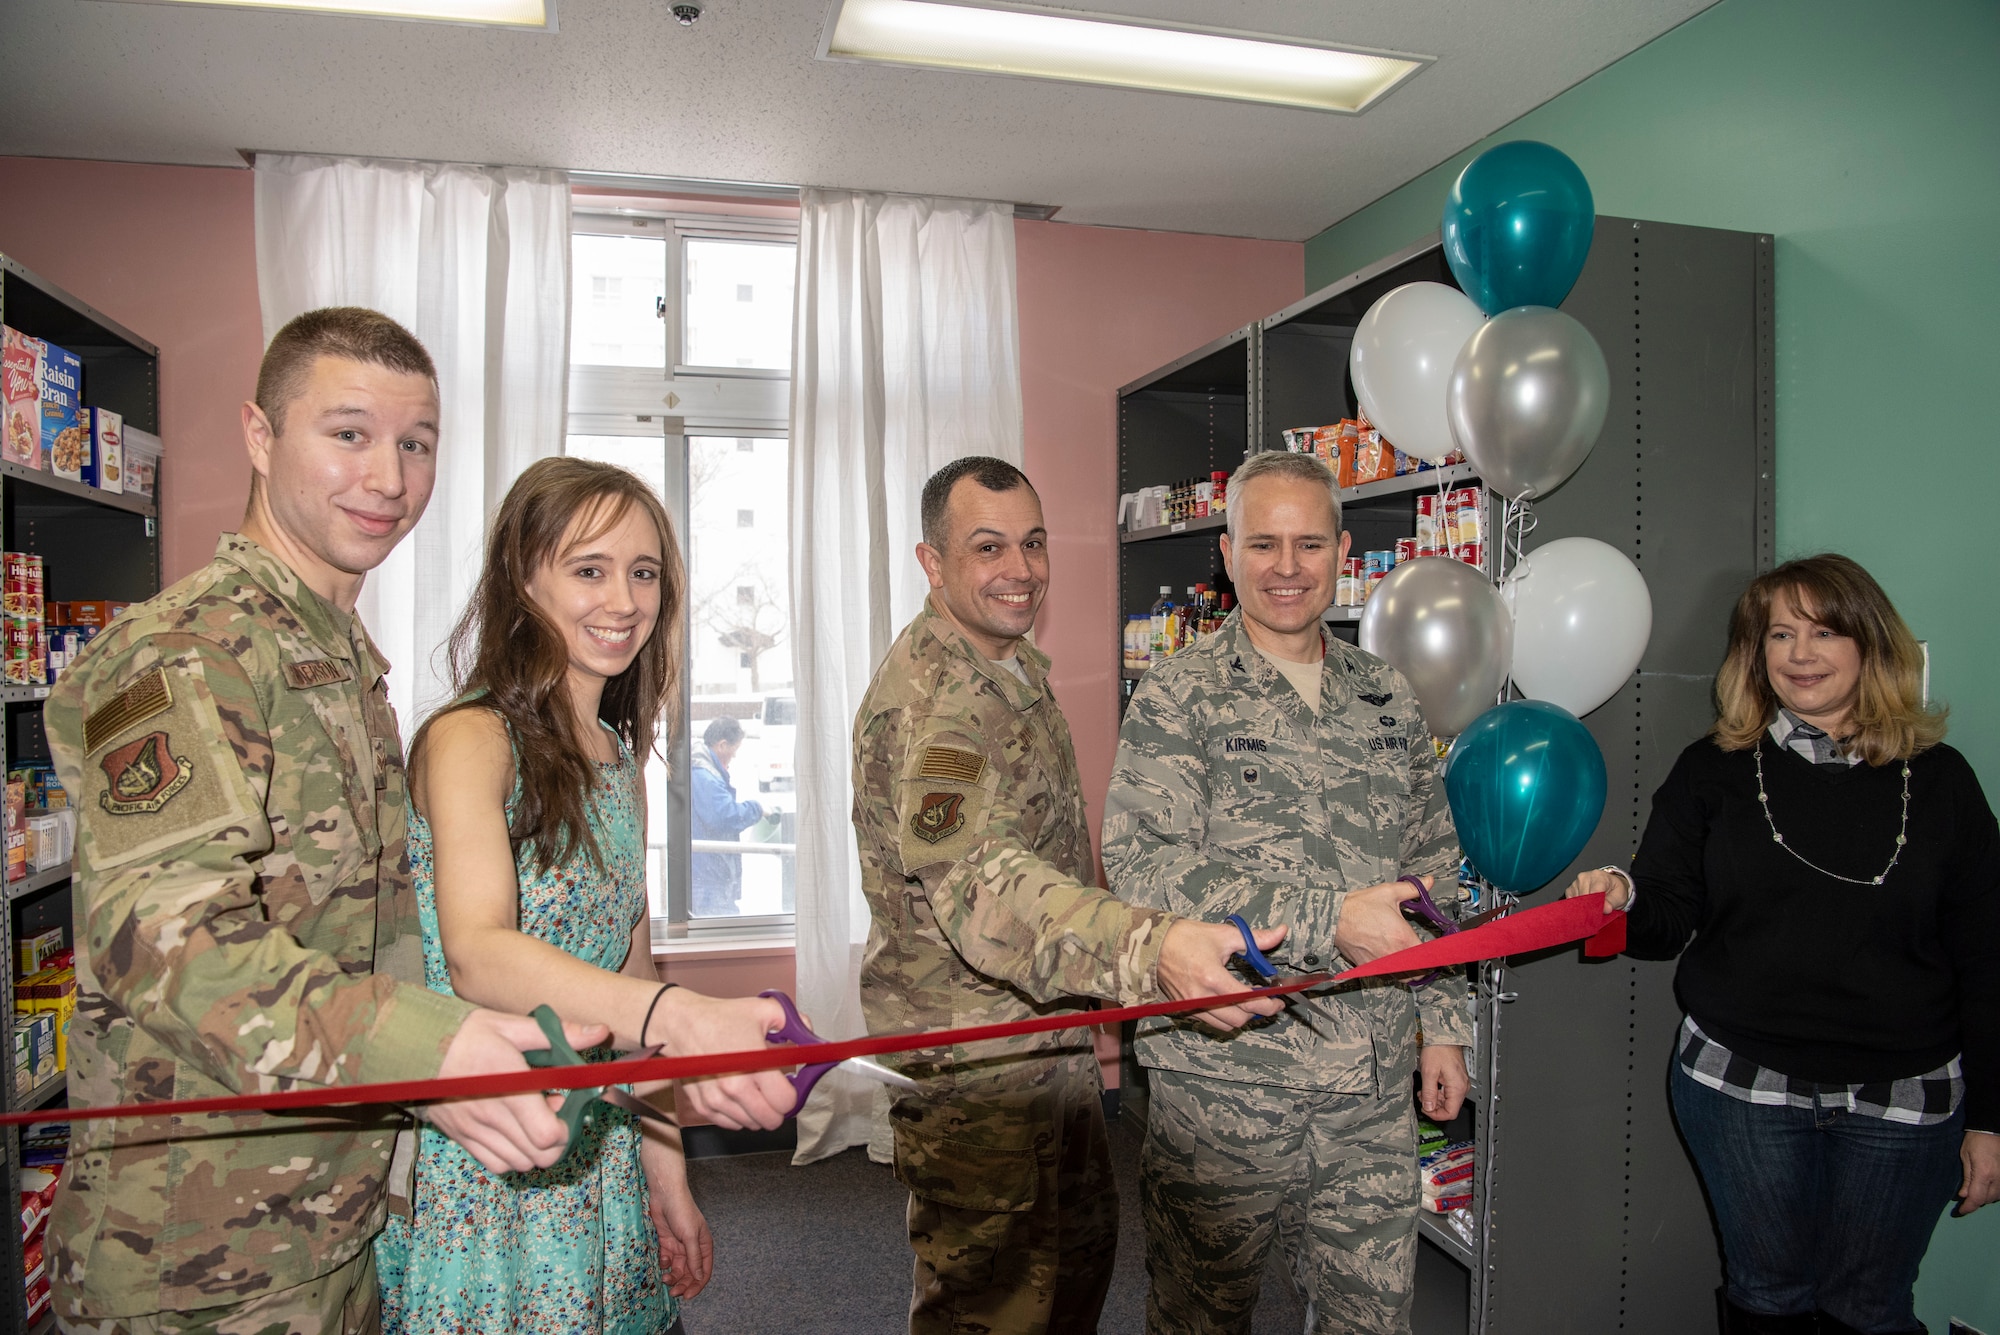 The 35th Fighter Wing Misawa Air Base wing leadership and thrift shop employee and volunteer cut a ribbon during the Misawa Thrift Shop food pantry opening at MAB, Japan, Jan. 29, 2019. Active duty members and their families can now pick up non-perishable, shelf-stable and non-expired packing food items at no cost. (U.S. Air Force photo by Airman 1st Class Xiomara Martinez)